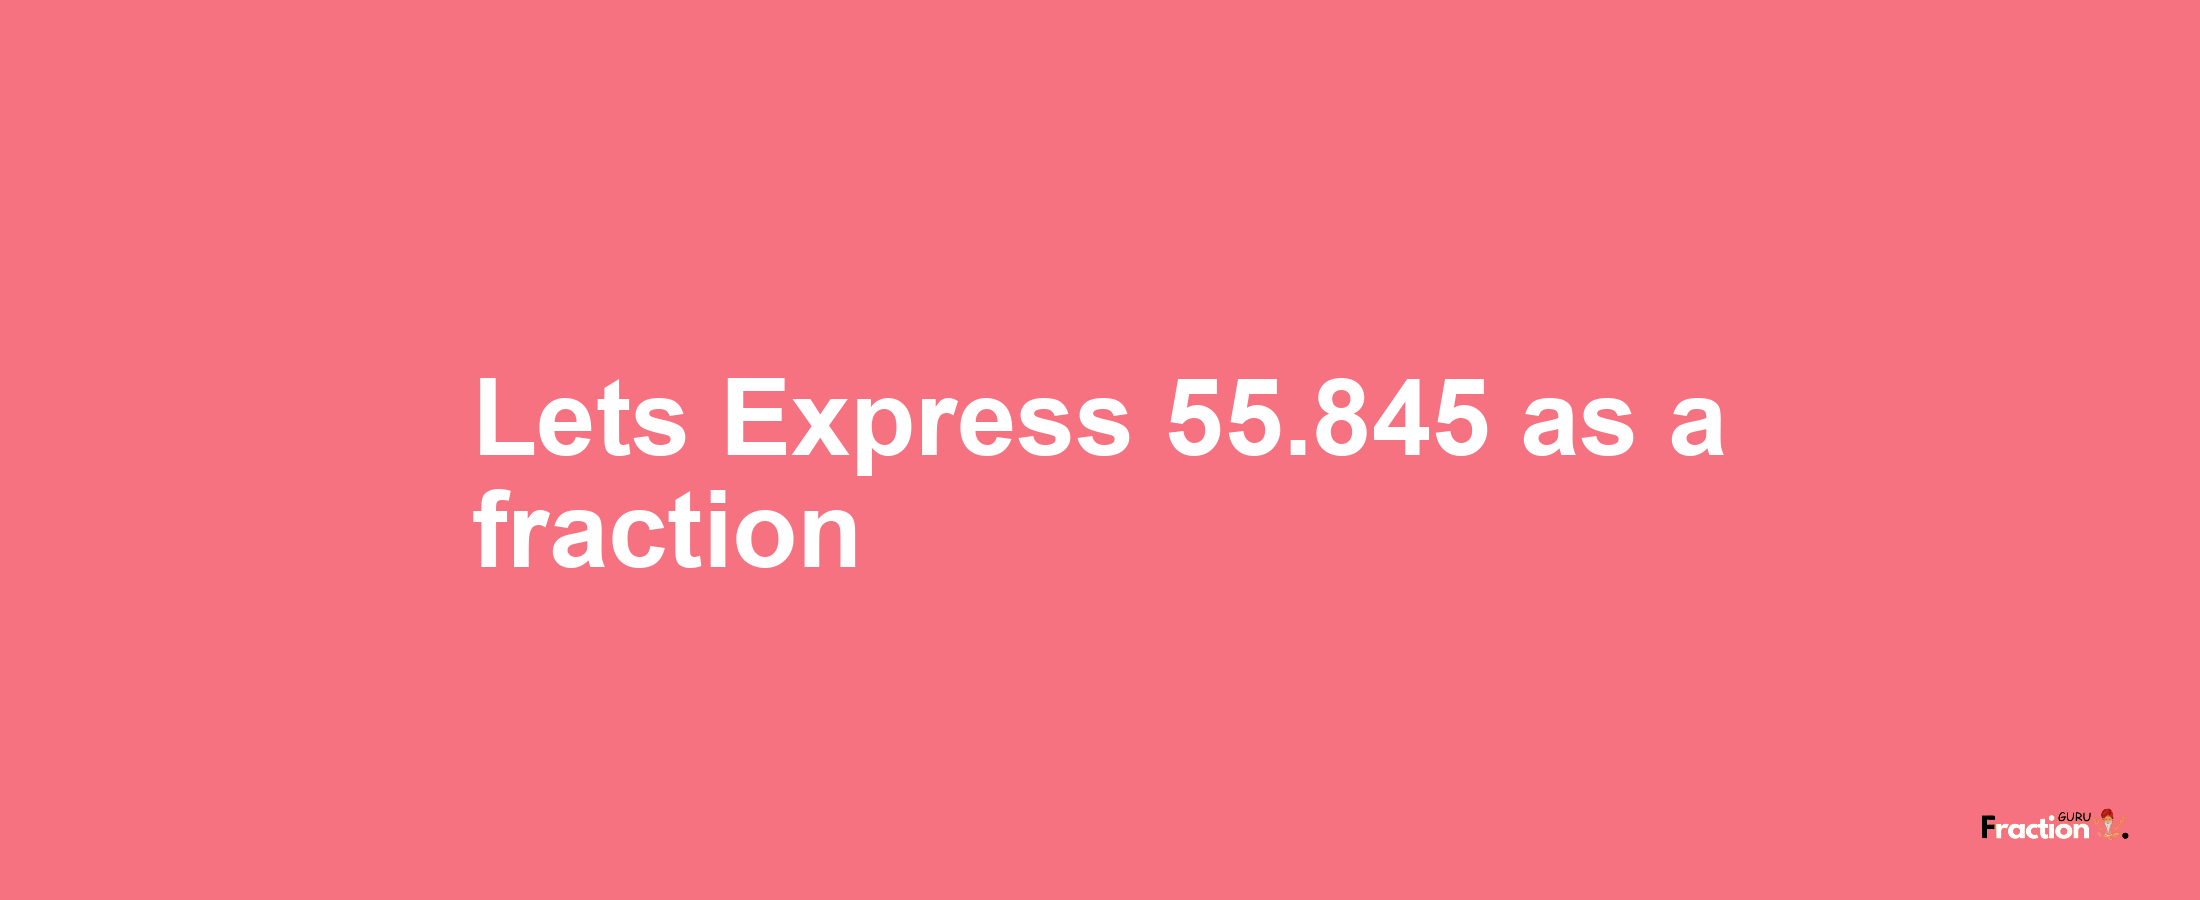 Lets Express 55.845 as afraction